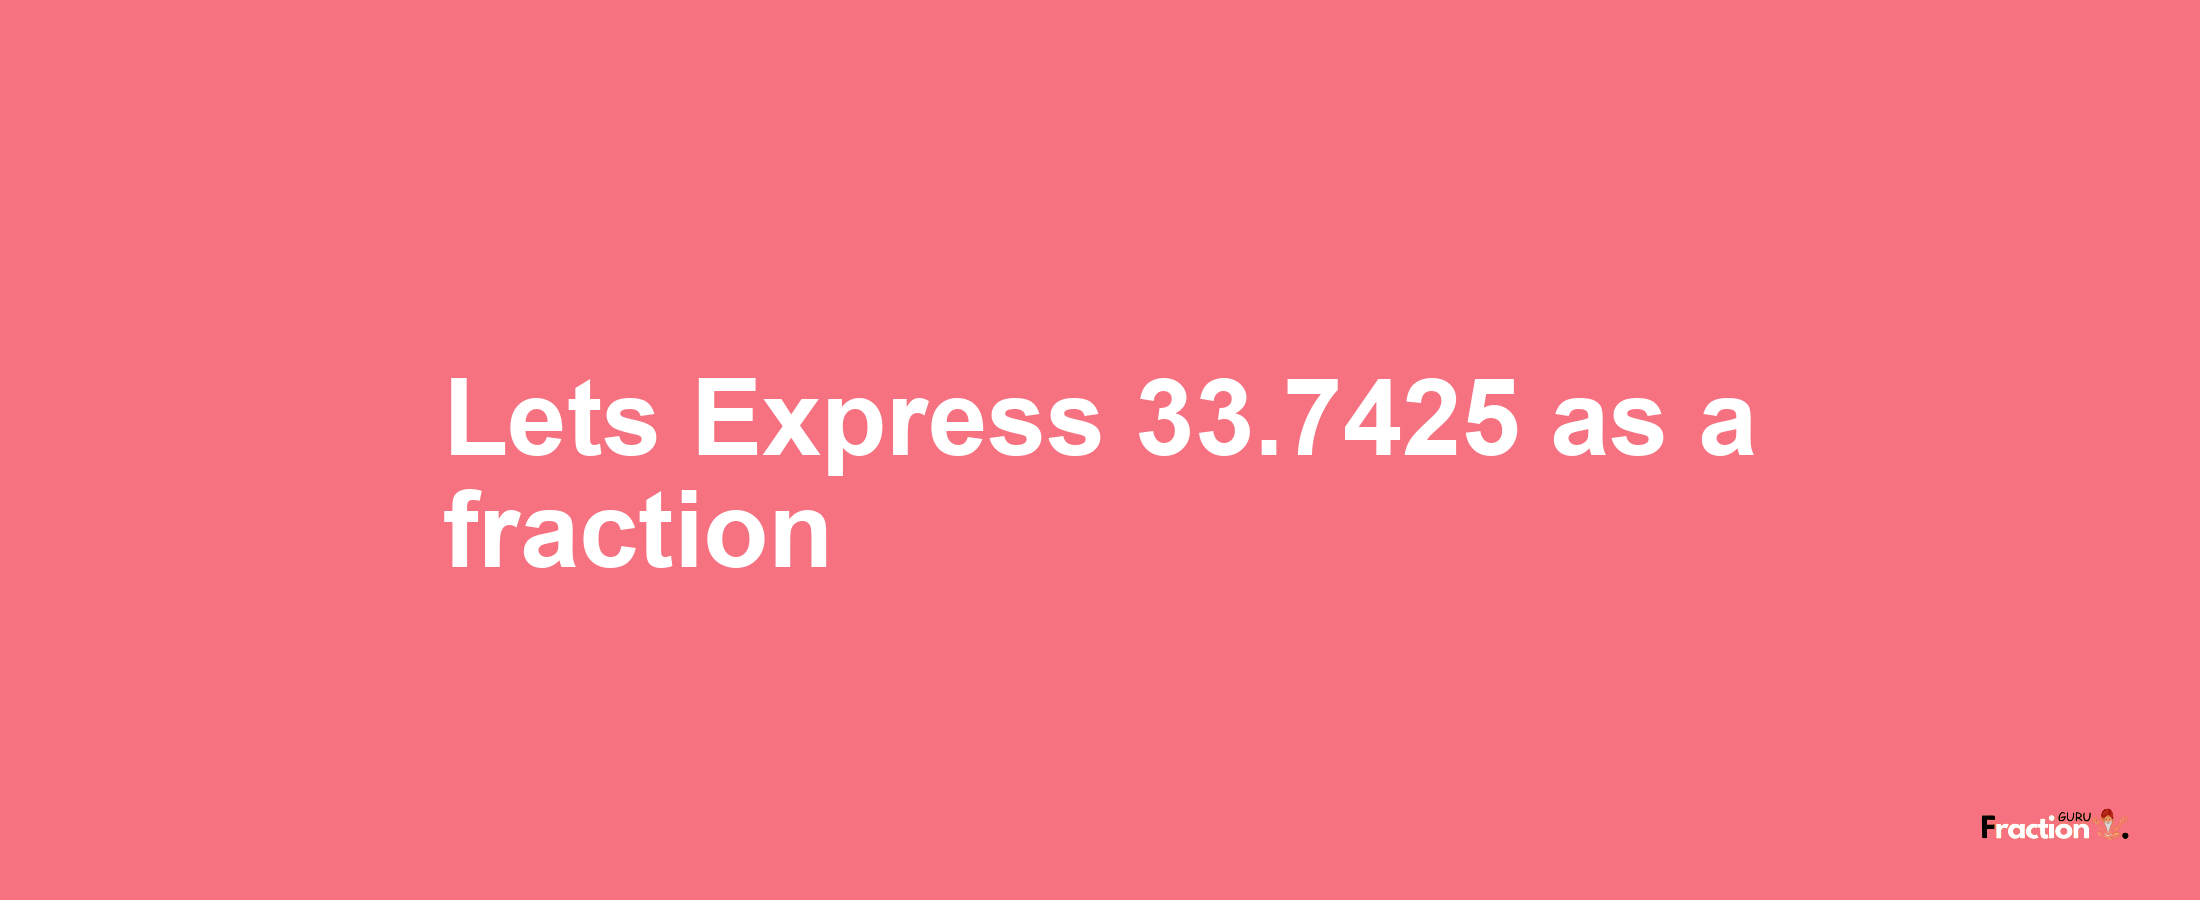 Lets Express 33.7425 as afraction